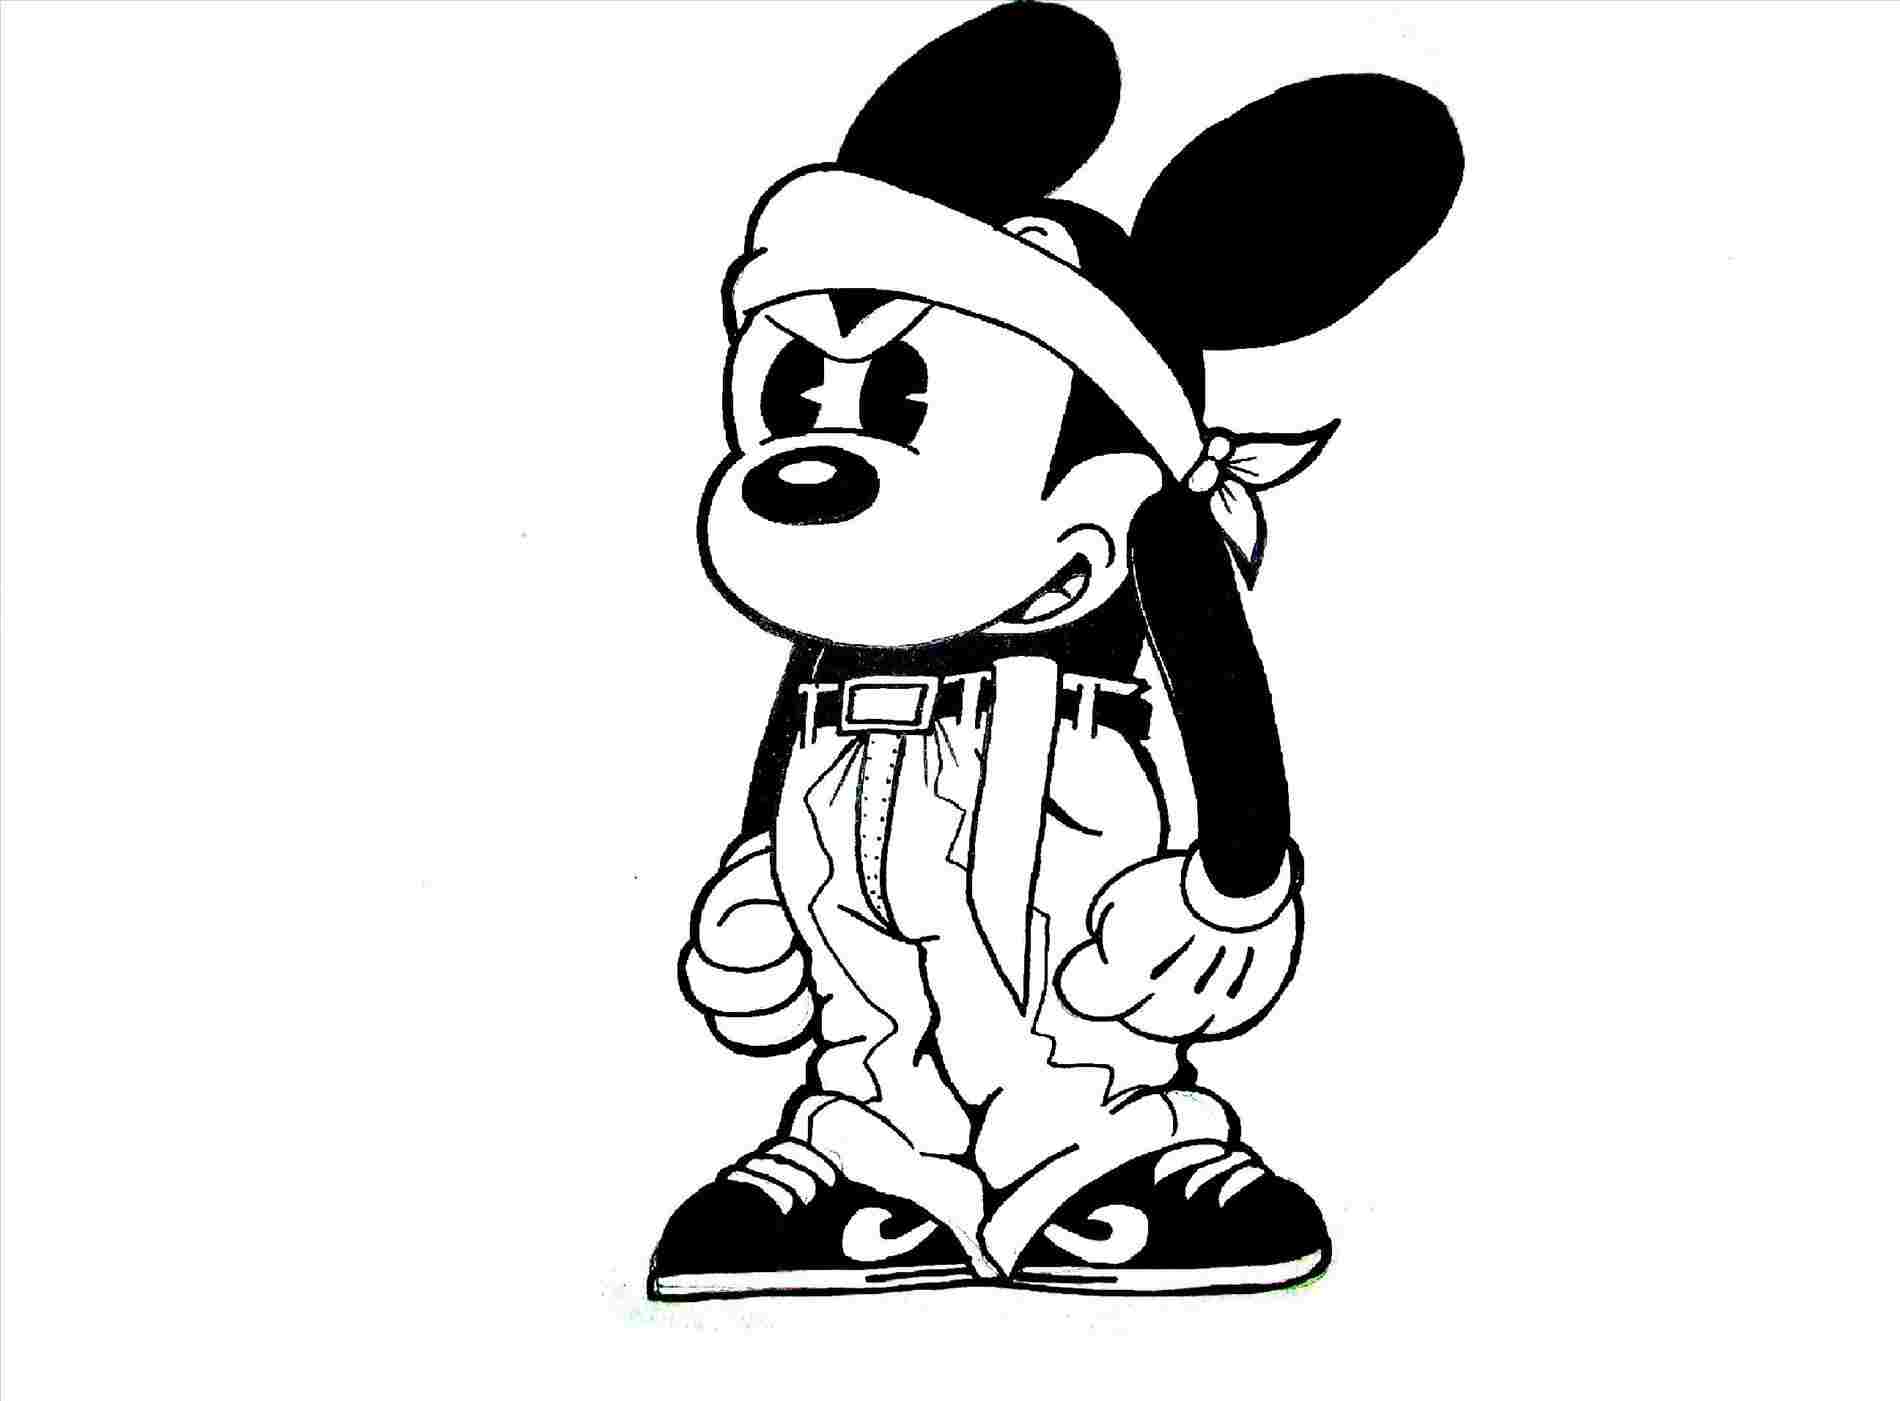 Mouse Cool Drawings A Gangsta Mickey Mouse Chicano - Mickey Mouse Drawings Cartoon Character - HD Wallpaper 